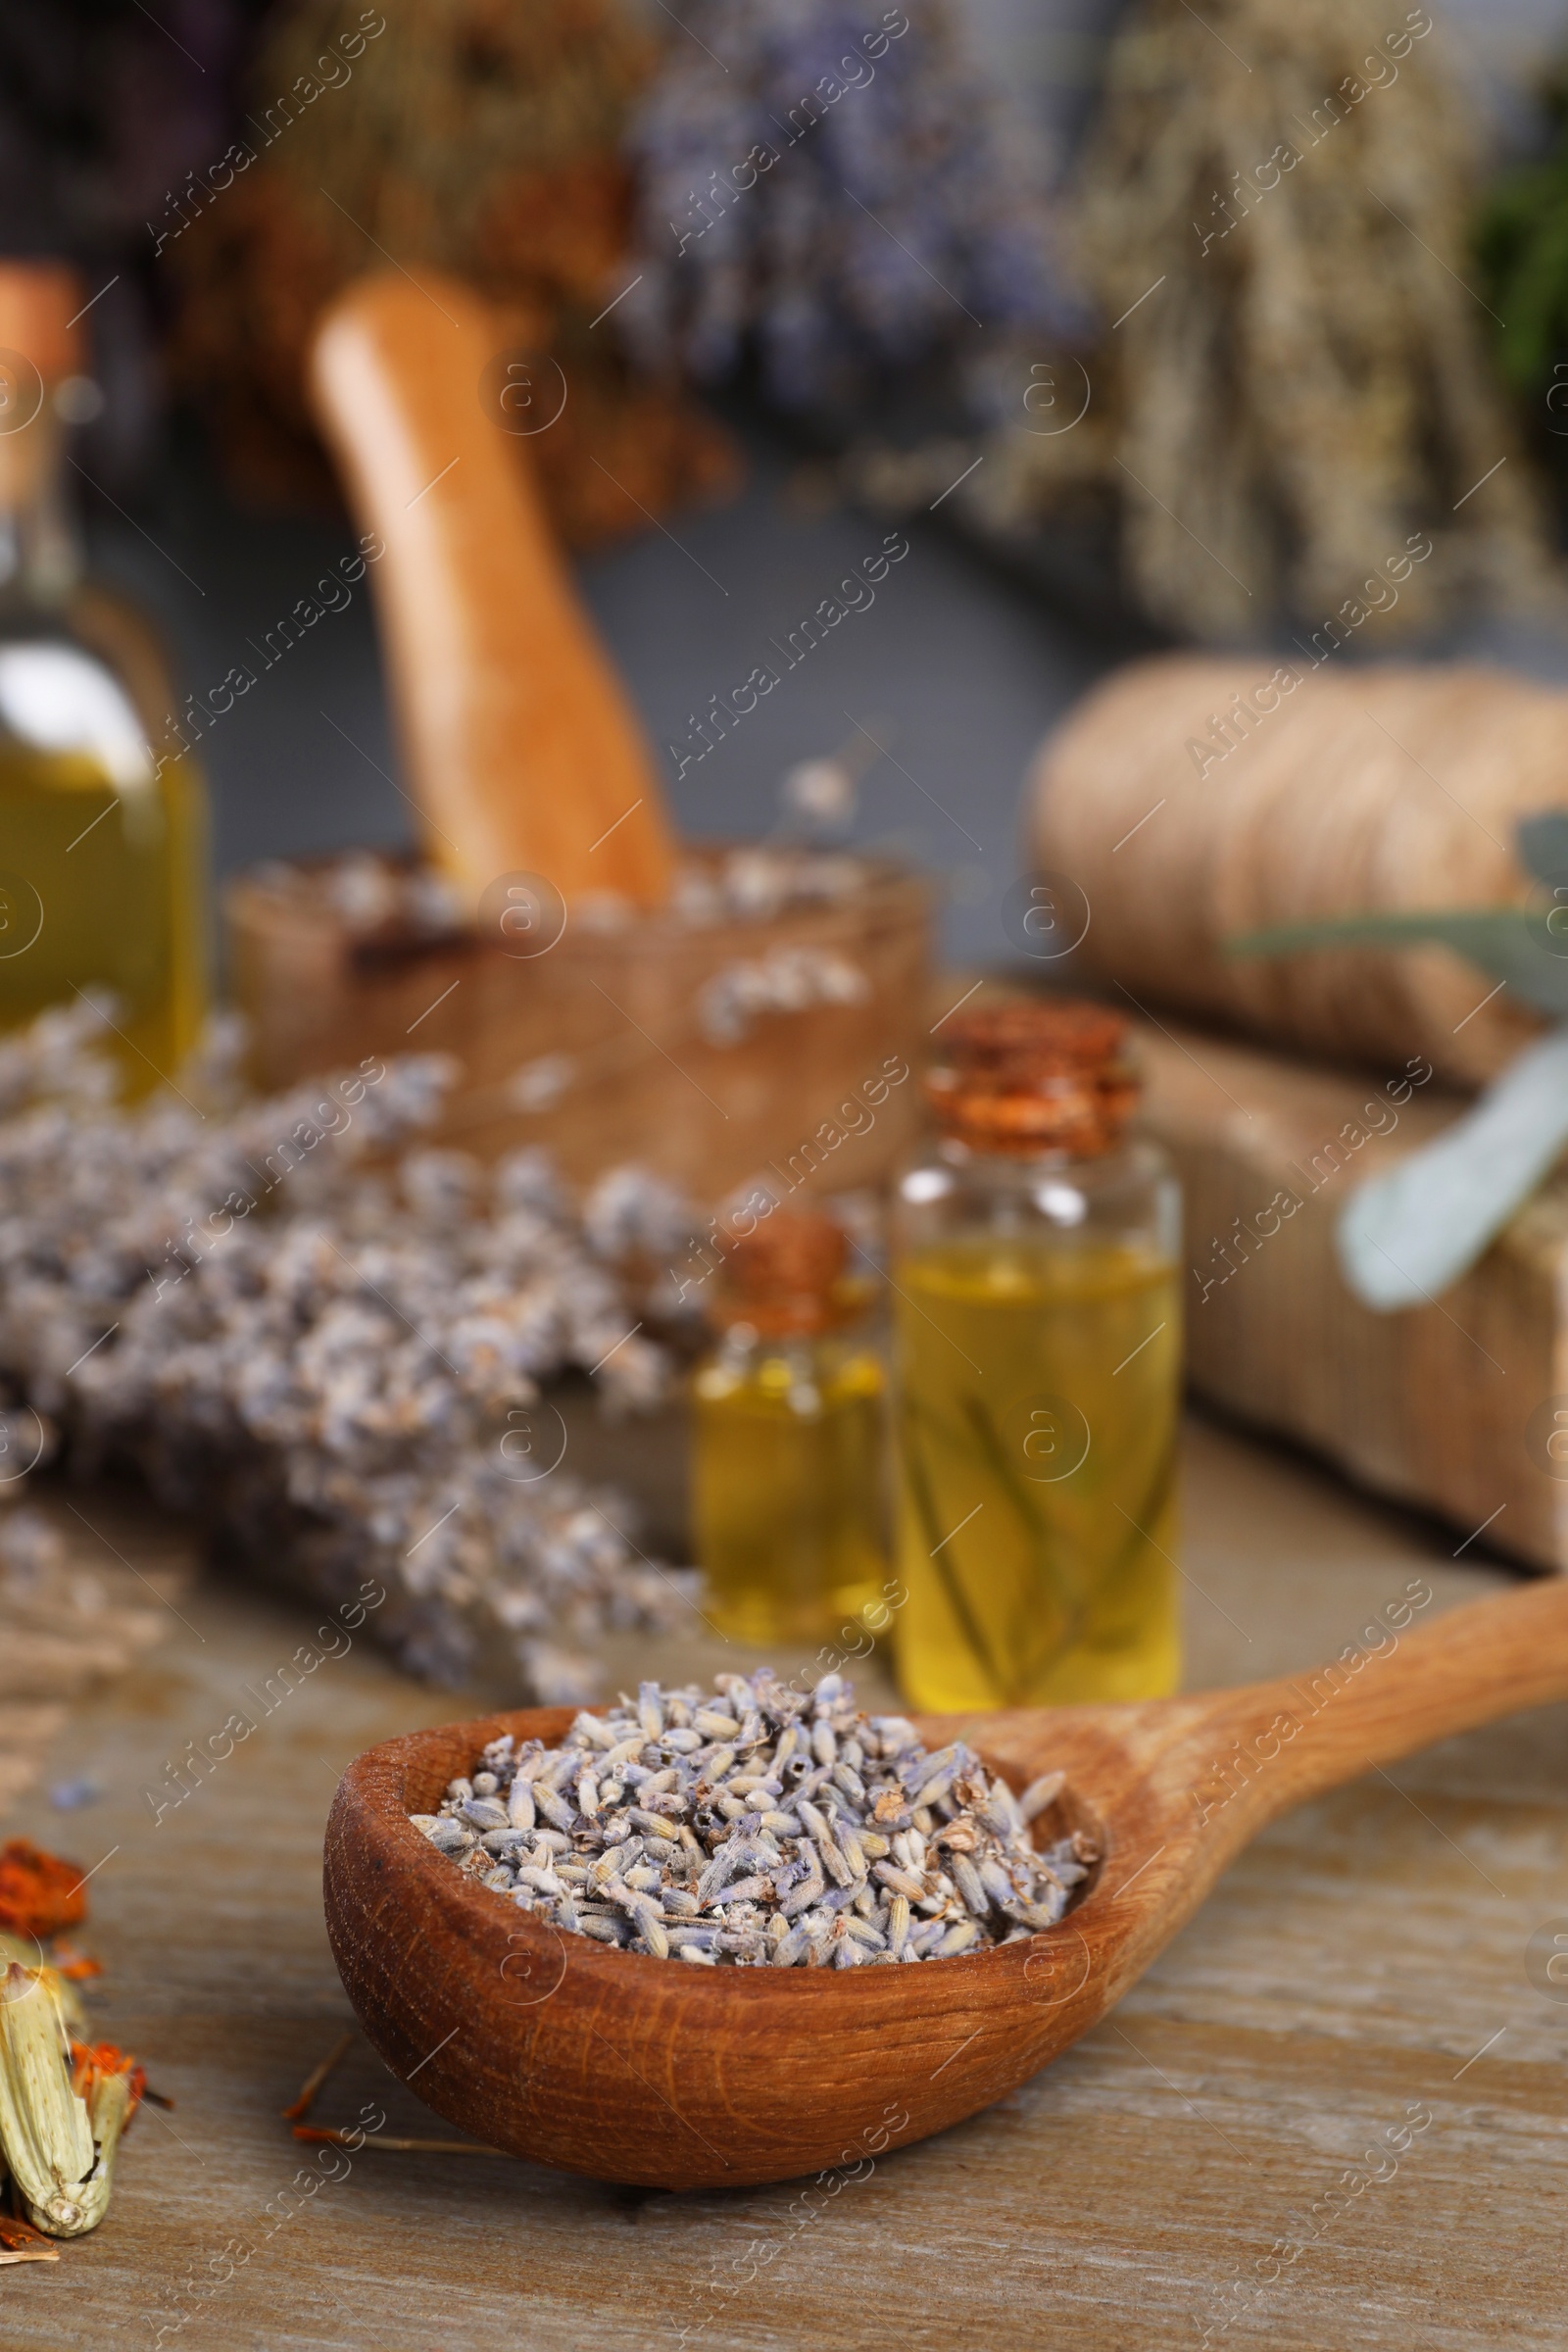 Photo of Spoon with lavender flowers on wooden table, closeup. Medicinal herbs